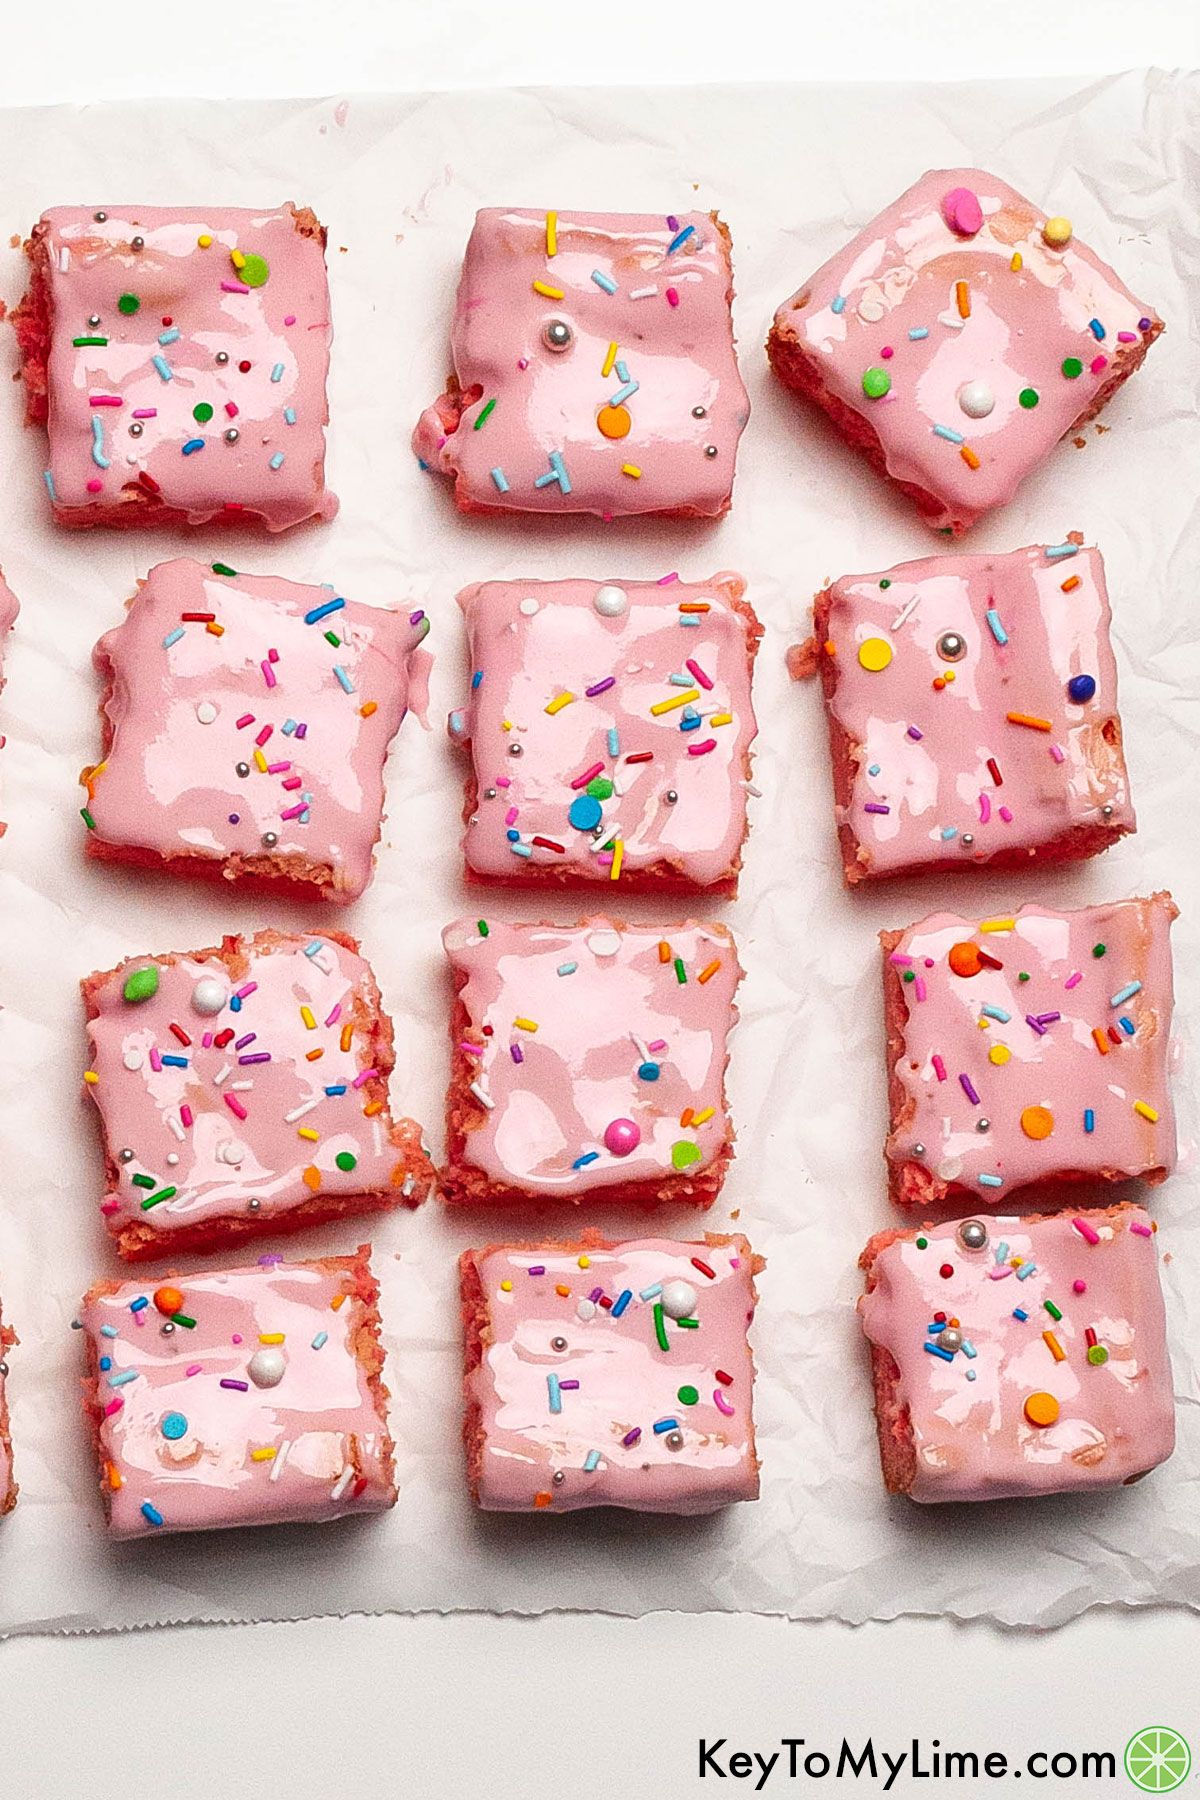 An overhead image of iced strawberry brownies with sprinkles.